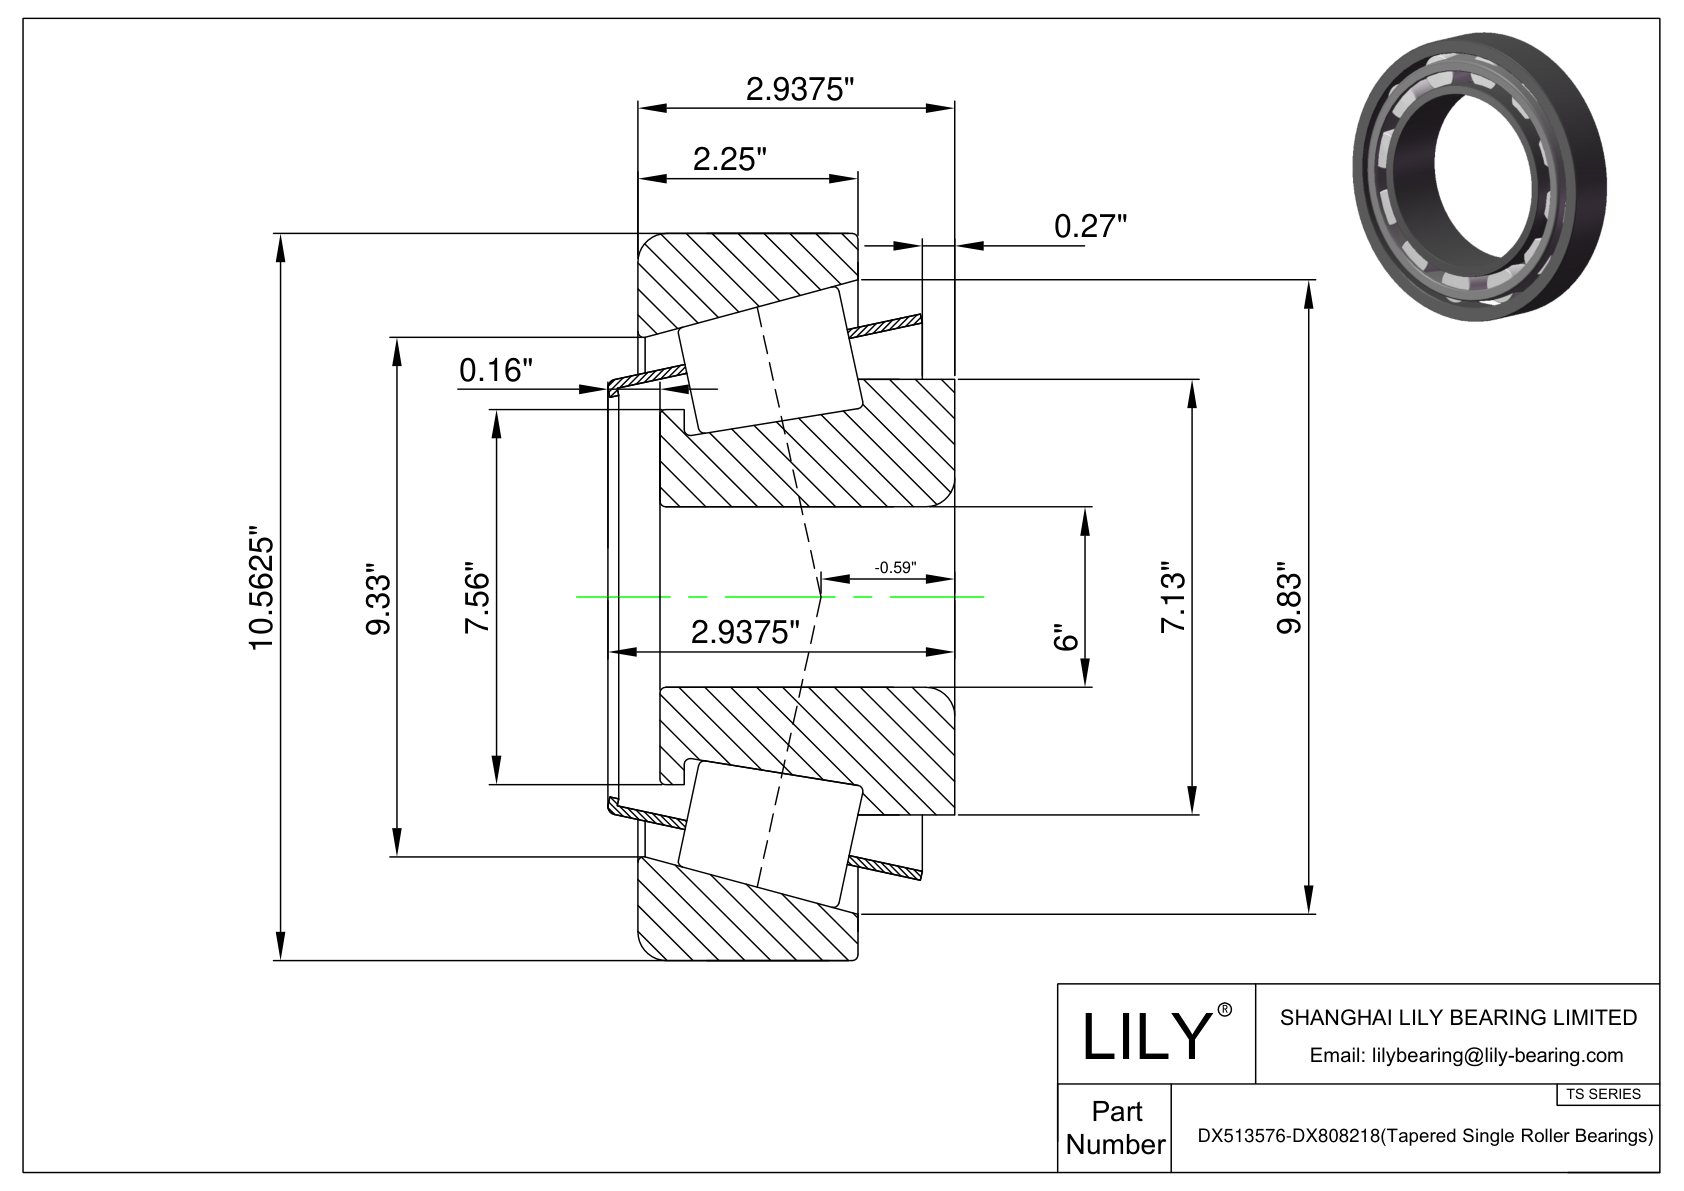 DX513576-DX808218 TS (Tapered Single Roller Bearings) (Imperial) cad drawing